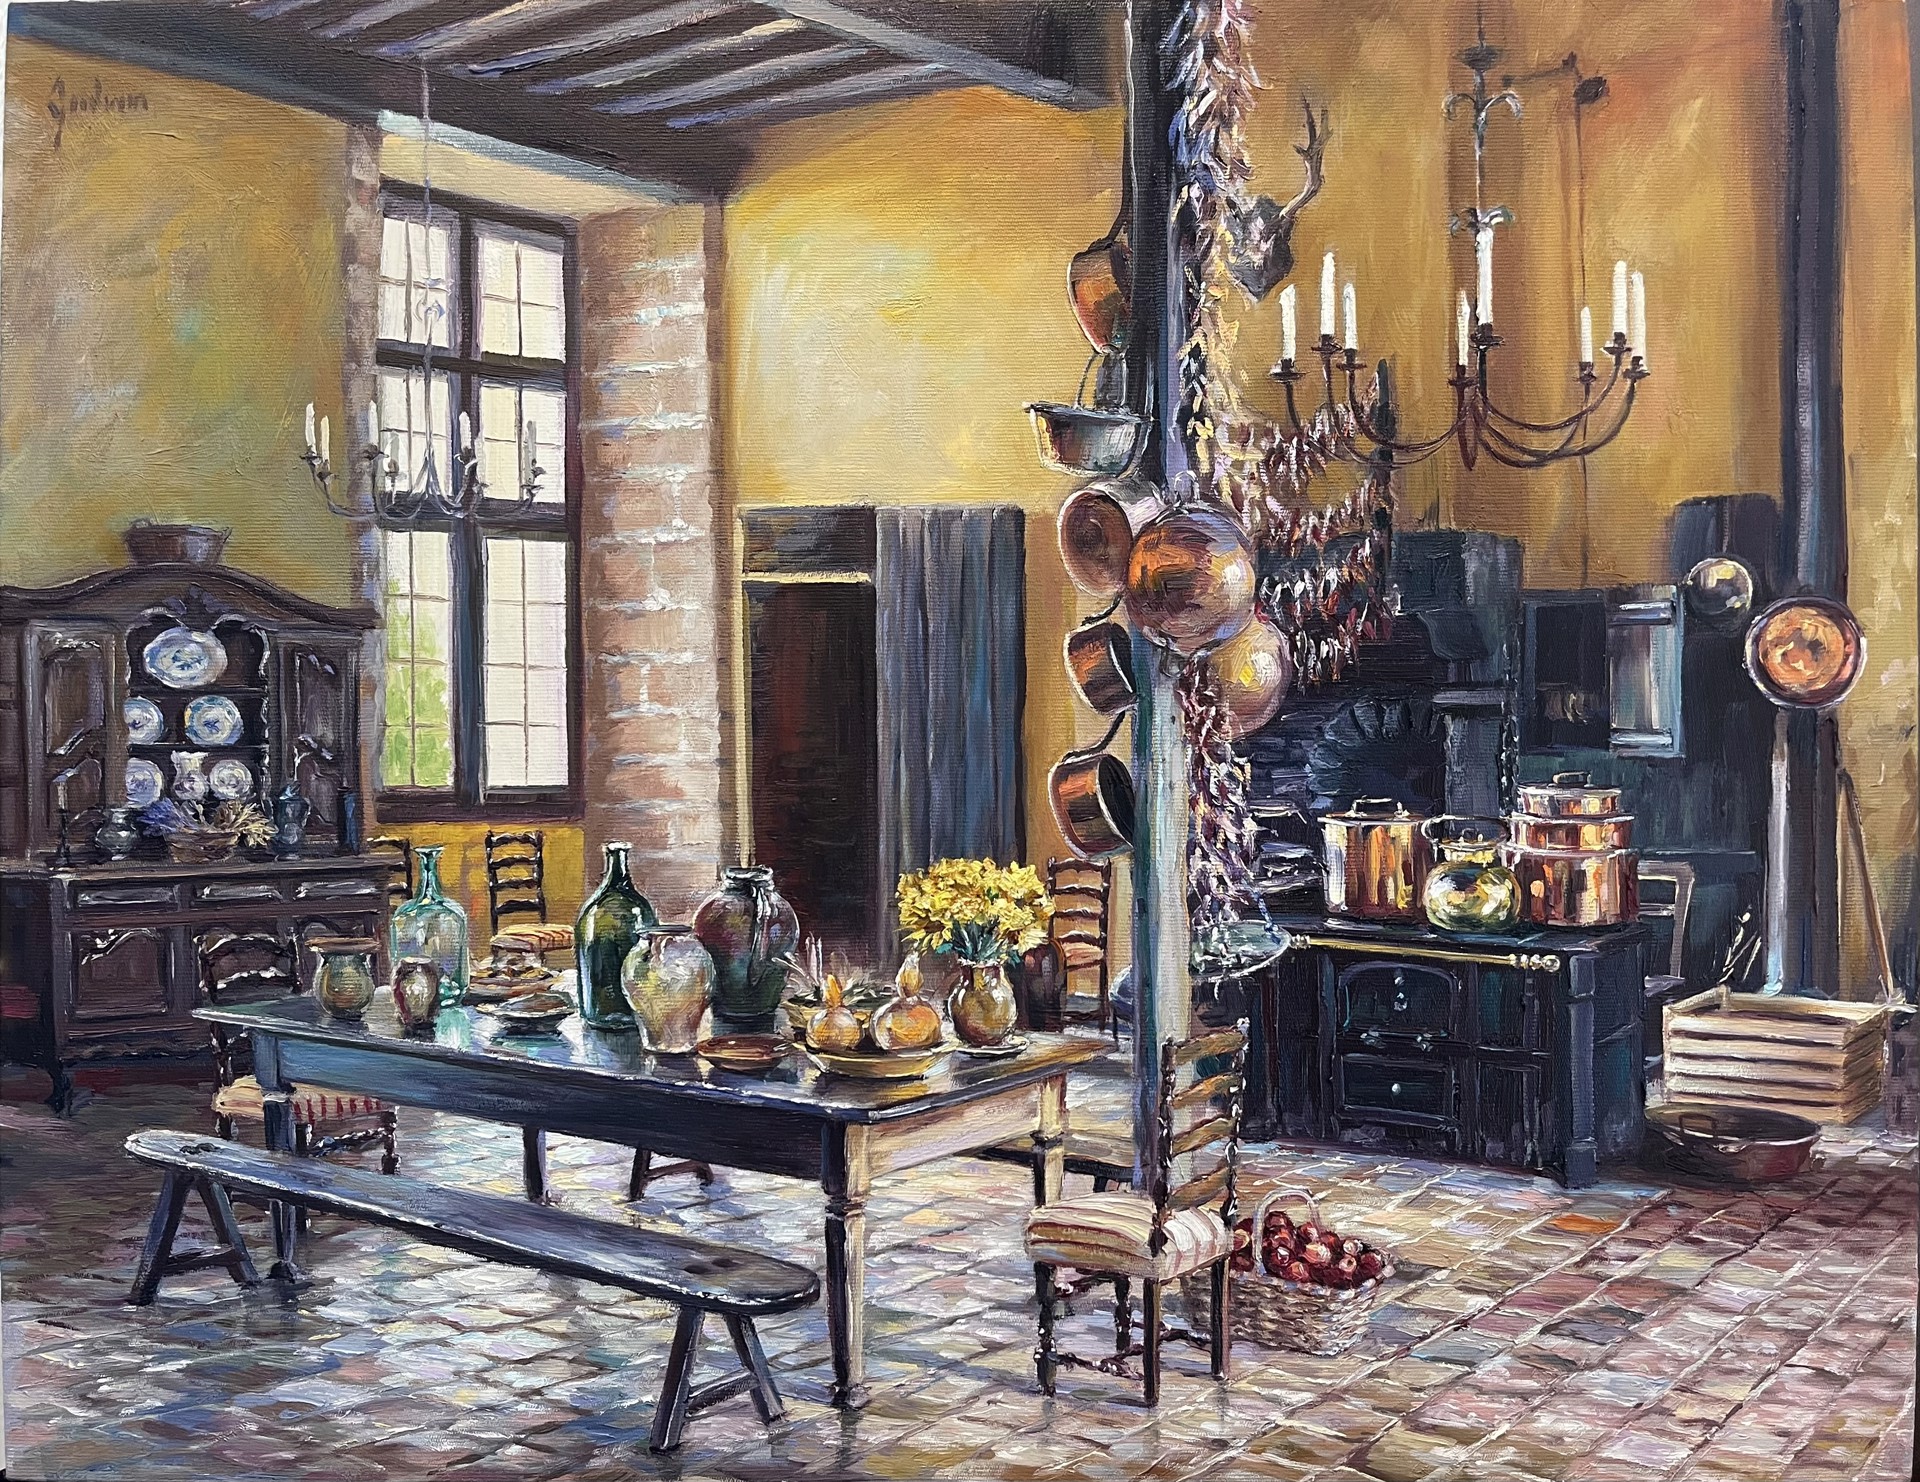 Timbered Kitchen at Chateau de Cormatin by Lindsay Goodwin